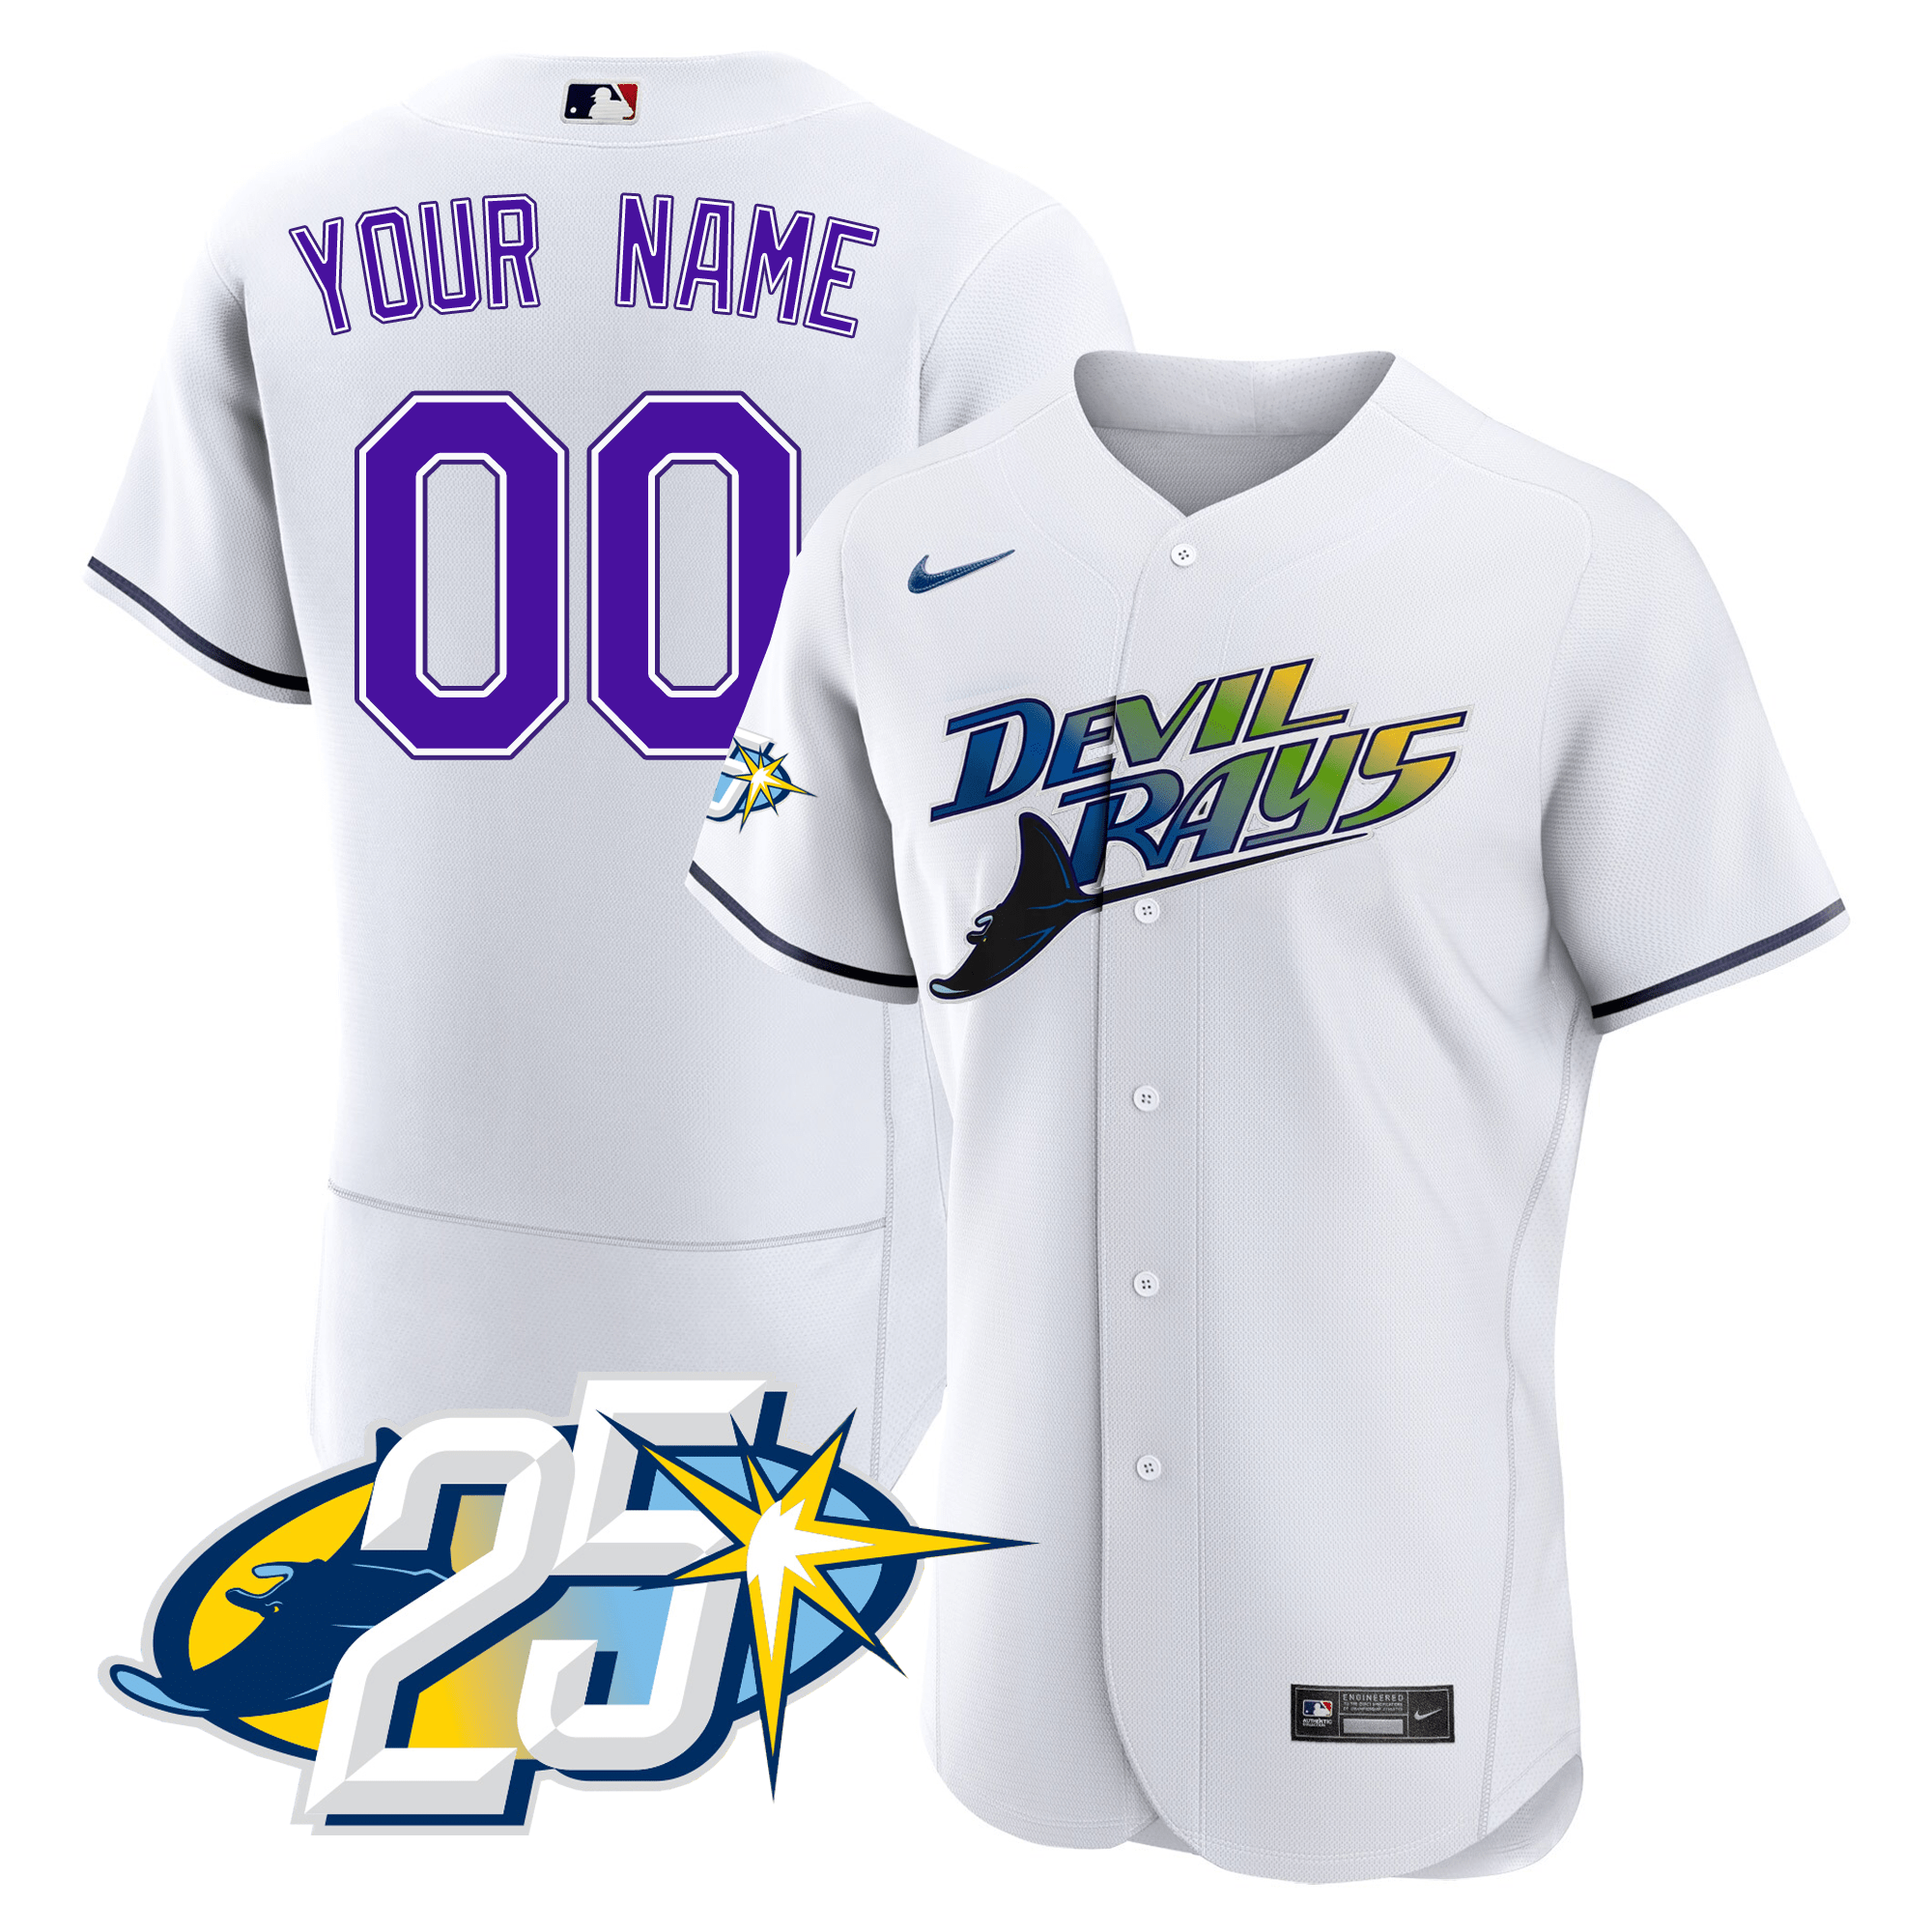 Tampa Bay Rays Players Stitched Jersey - 25th Anniversary Patch